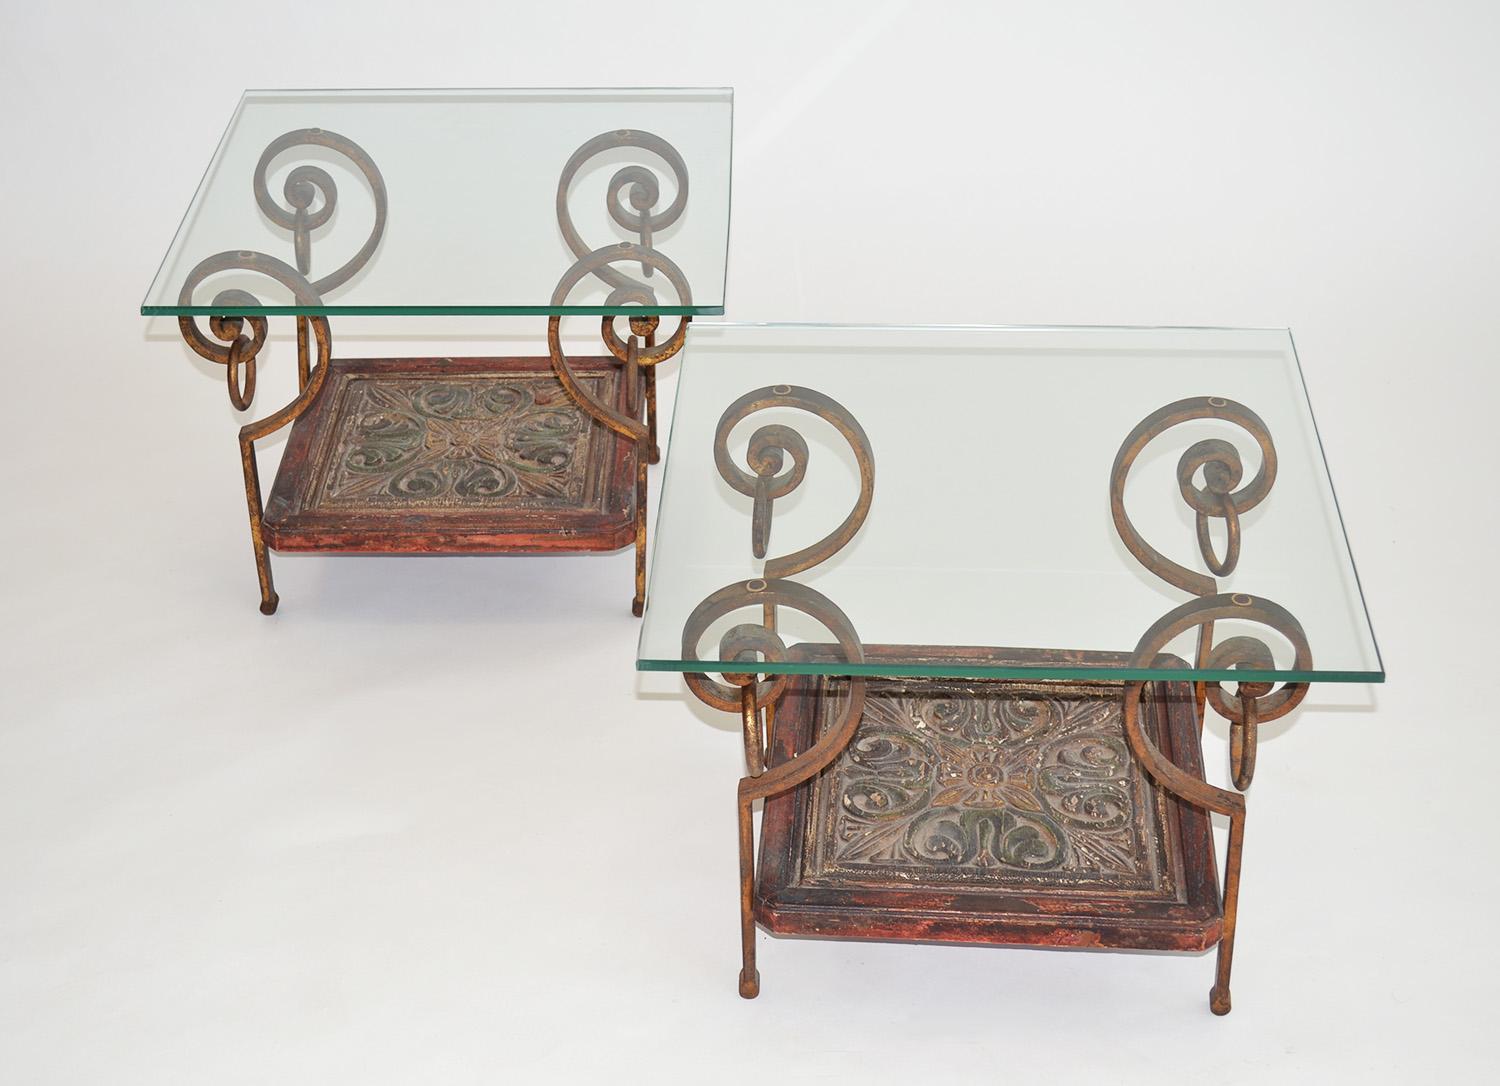 Pair of mid century French side or end tables French 1960s
Pair of mid century French side or end tables  French 1960's. Unique tables d'appoint on carved poly chromed wood base / shelf with antique gold gilt iron legs and scrolling with decorative